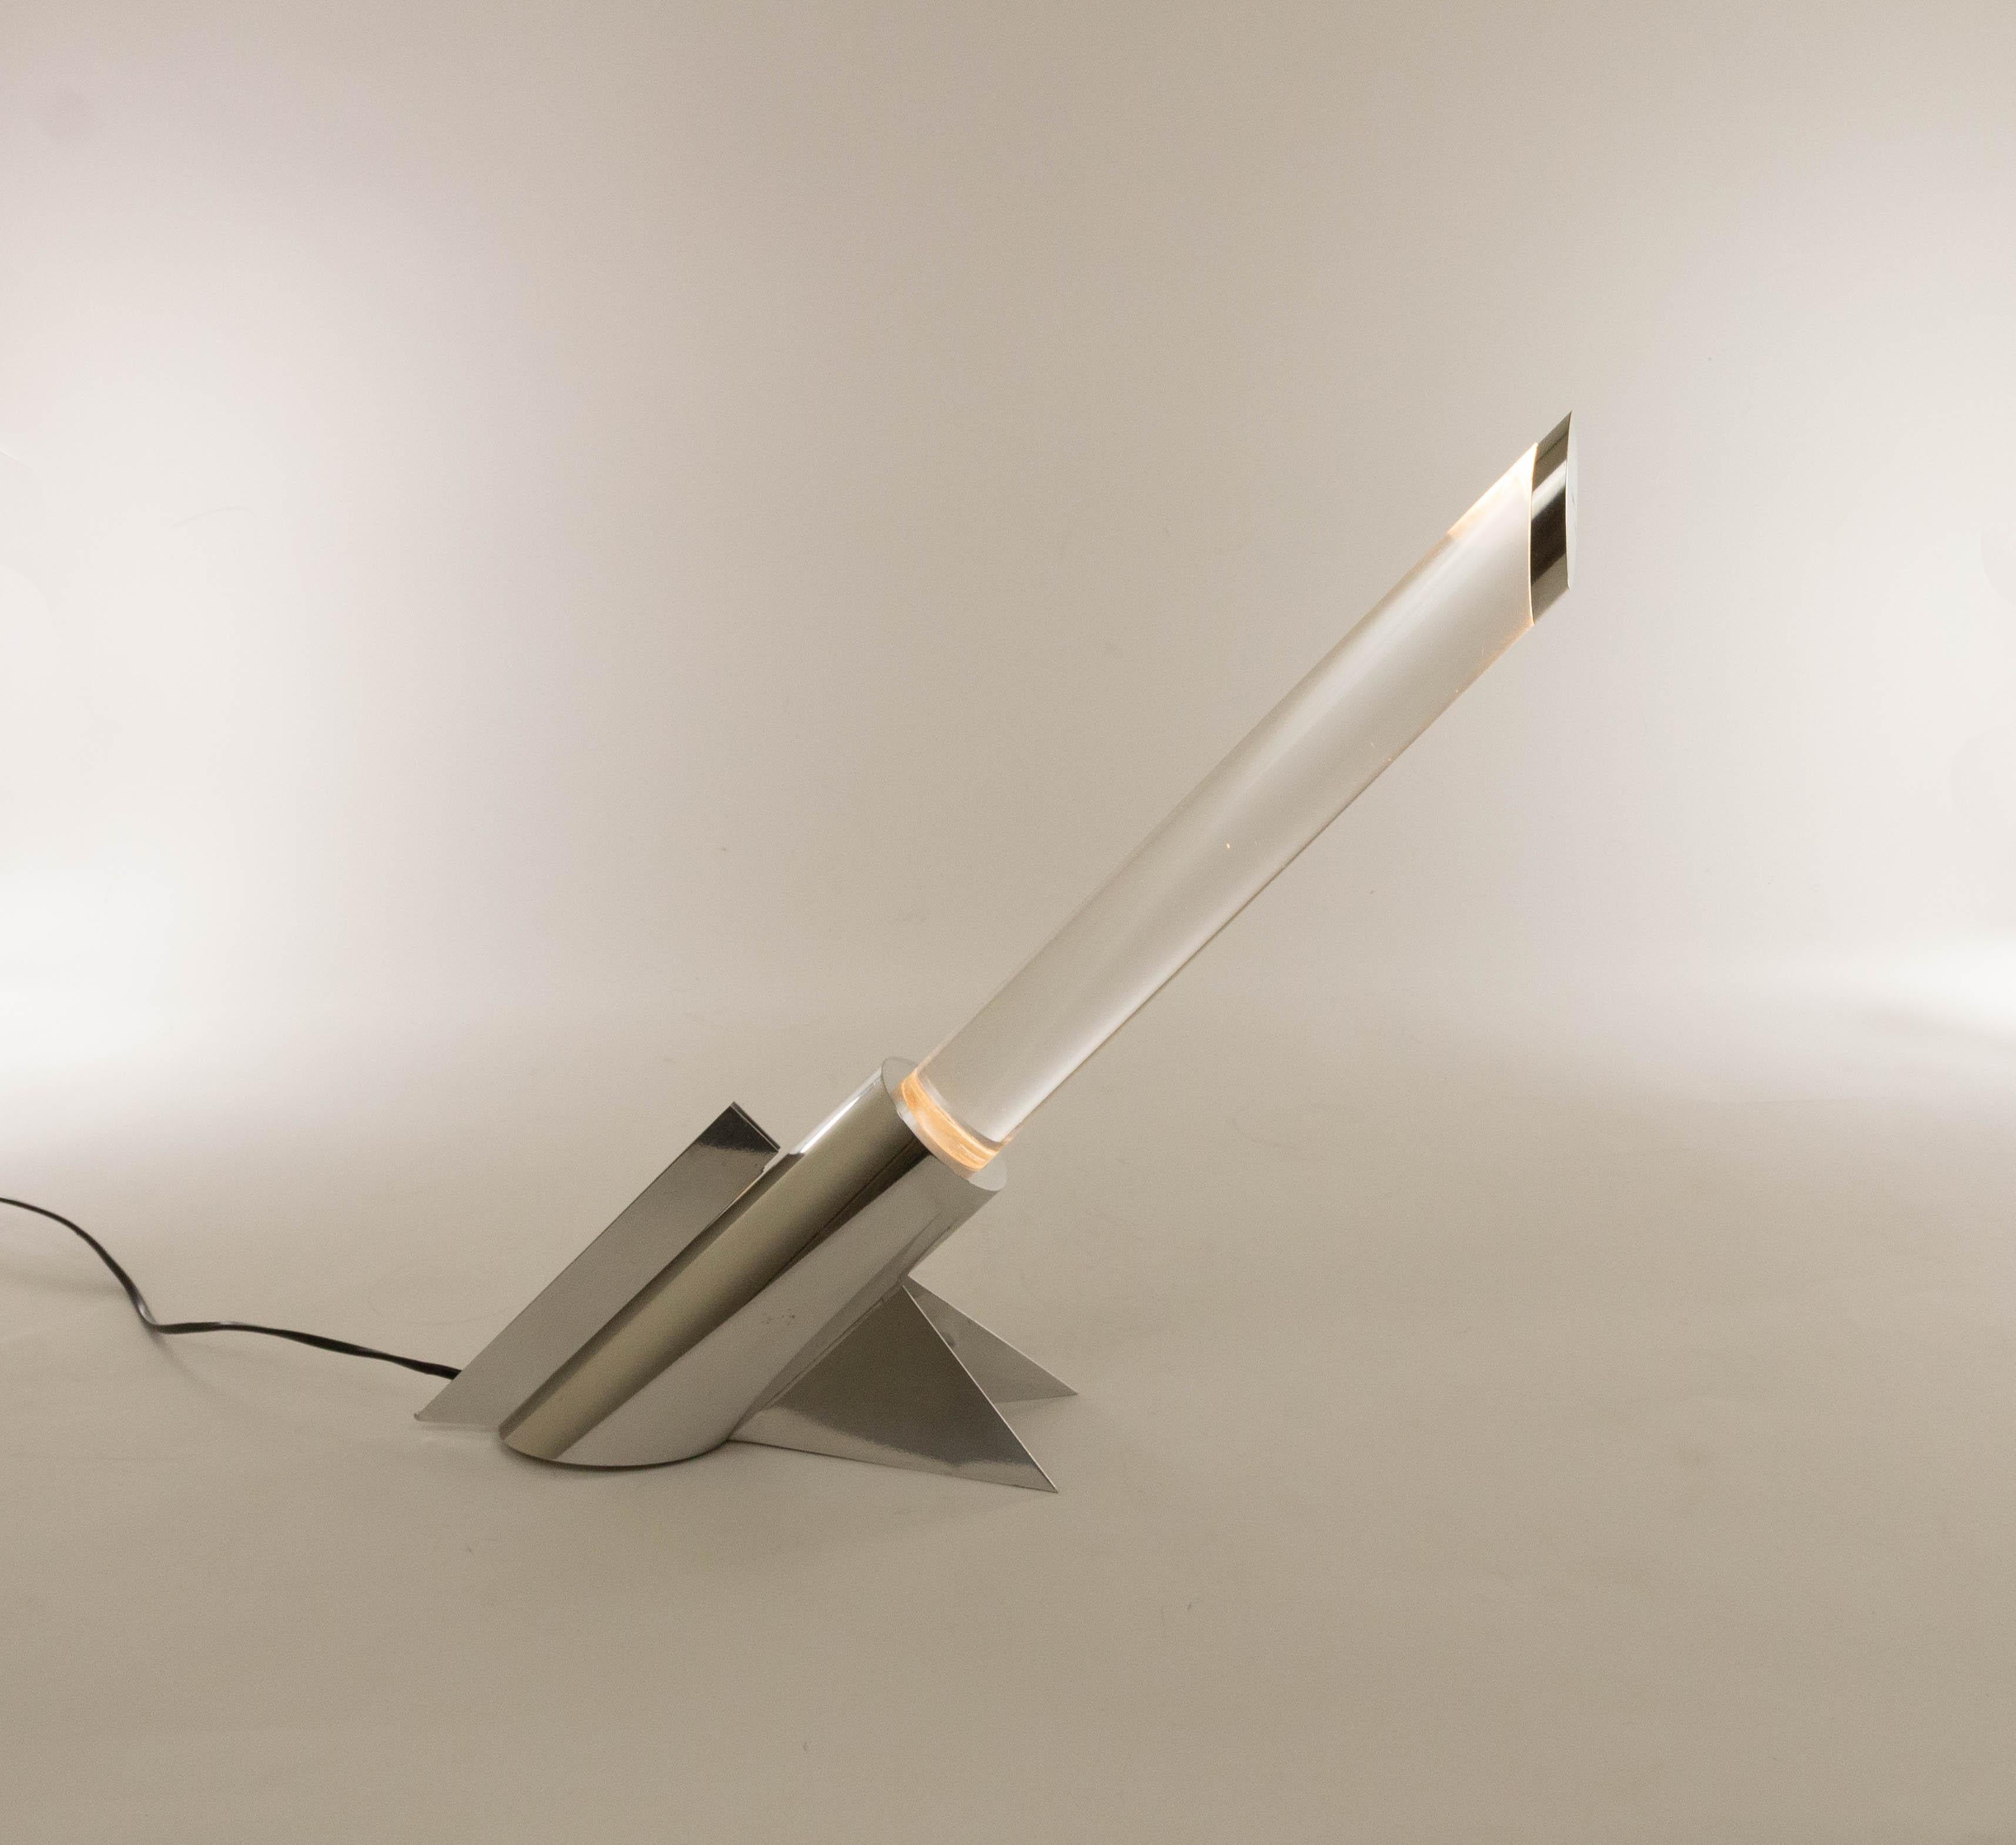 Futuristic perspex table lamp by an unknown manufacturer from -most likely- Italy, probably produced in the 1970s.

The lamp consists of a metal chromed base containing the light source and a relatively heavy, massive transparent tube. The tube